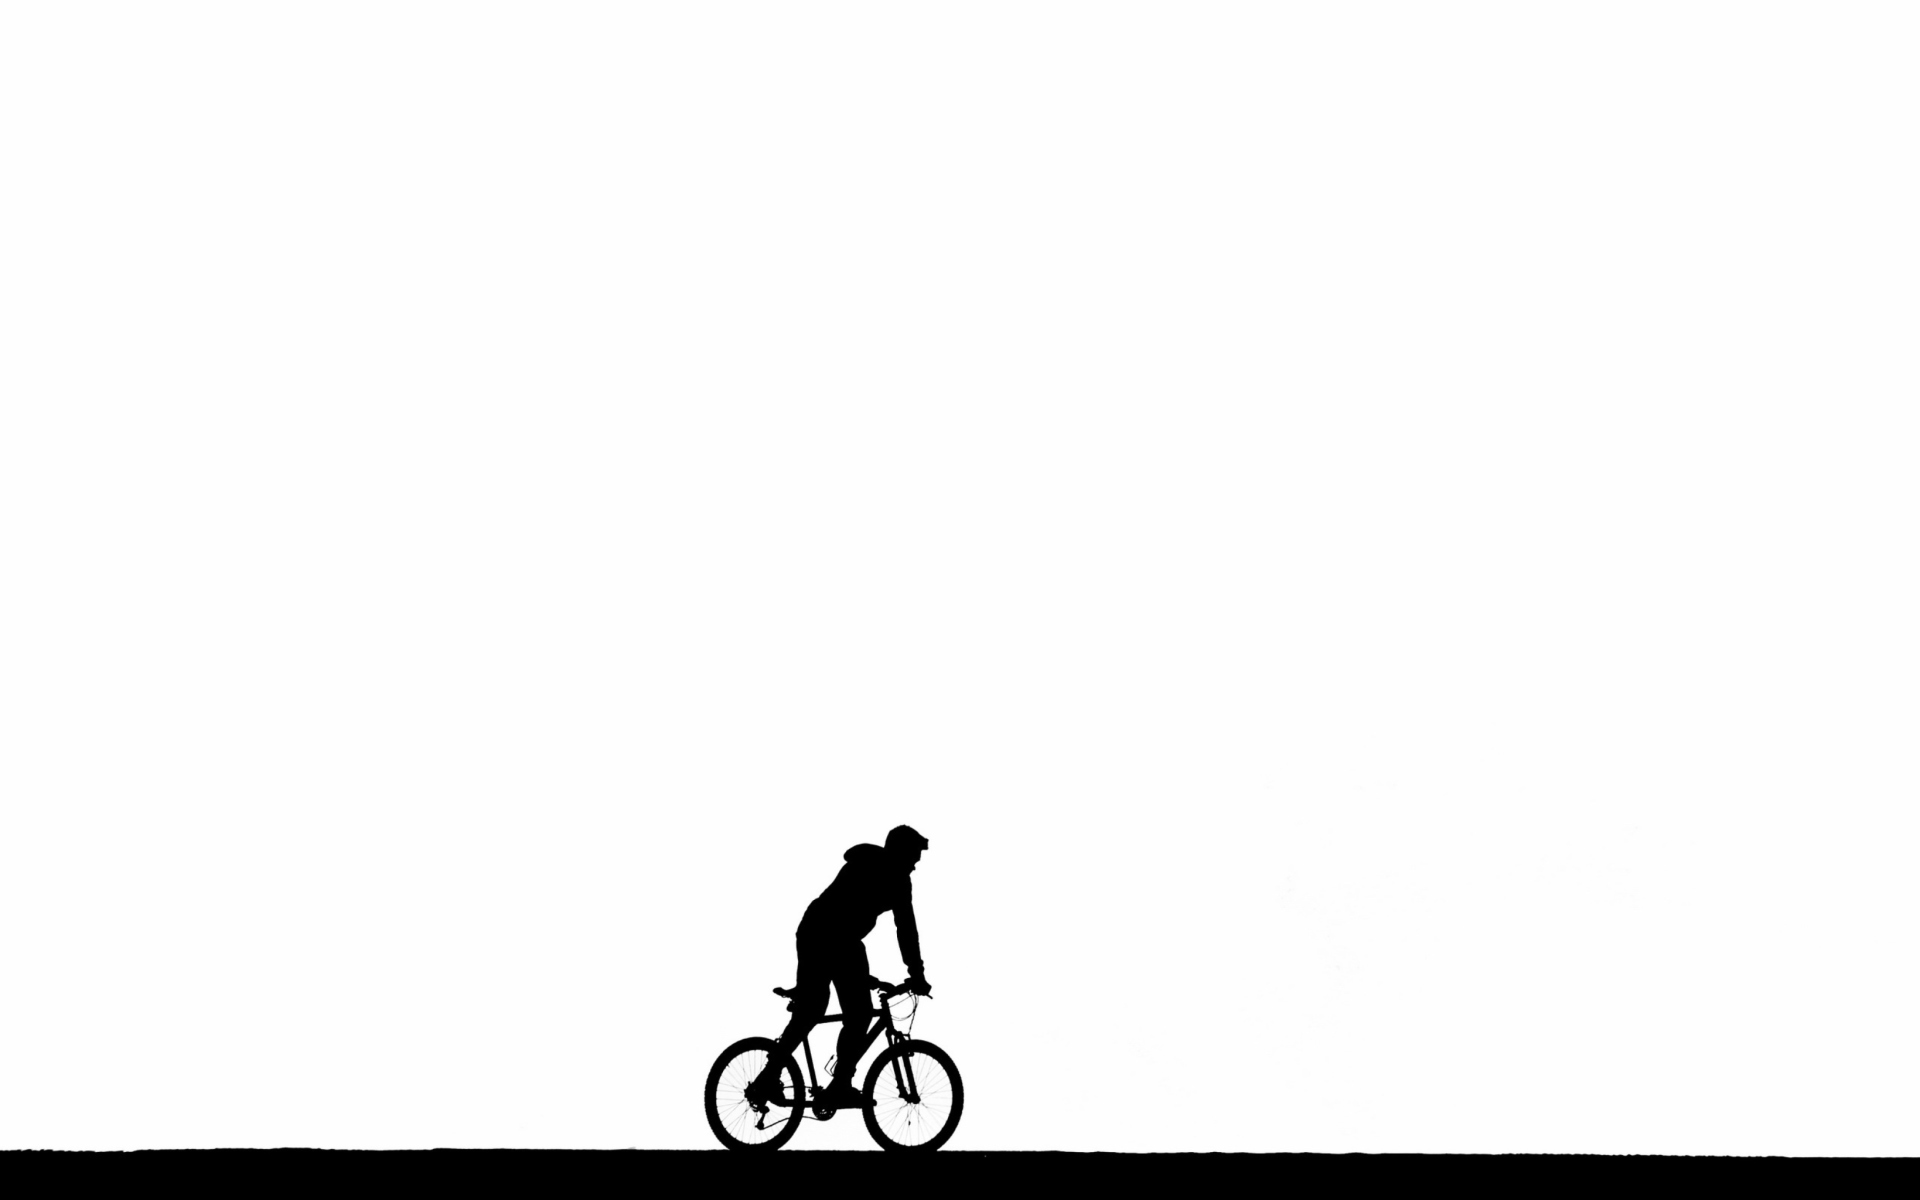 Bicycle Silhouette wallpaper 1920x1200